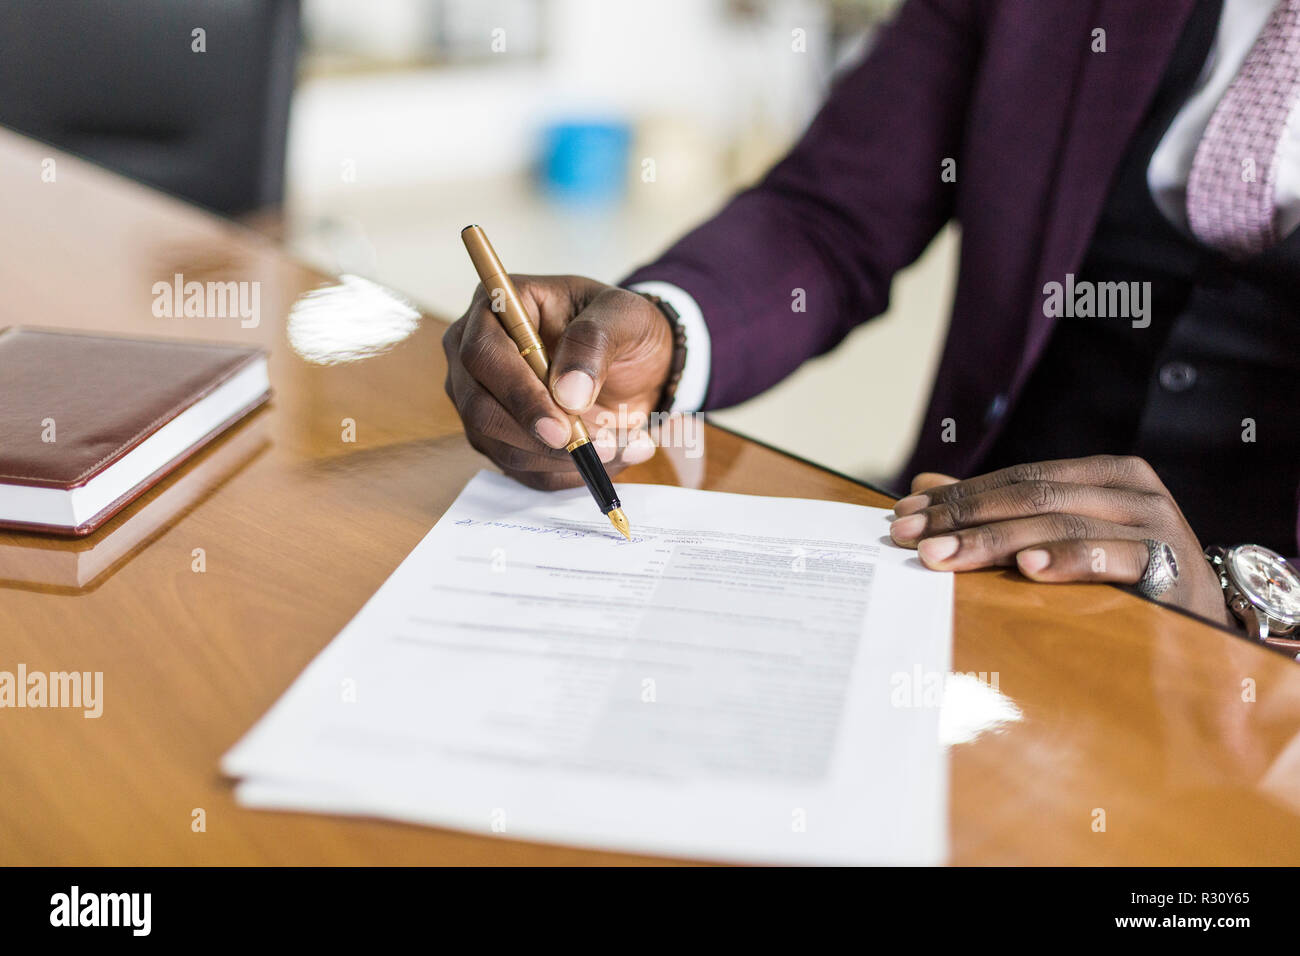 https://c8.alamy.com/comp/R30Y65/african-american-man-signing-contract-black-man-hand-putting-signature-on-official-document-biracial-clients-customers-couple-make-purchase-or-sign-R30Y65.jpg